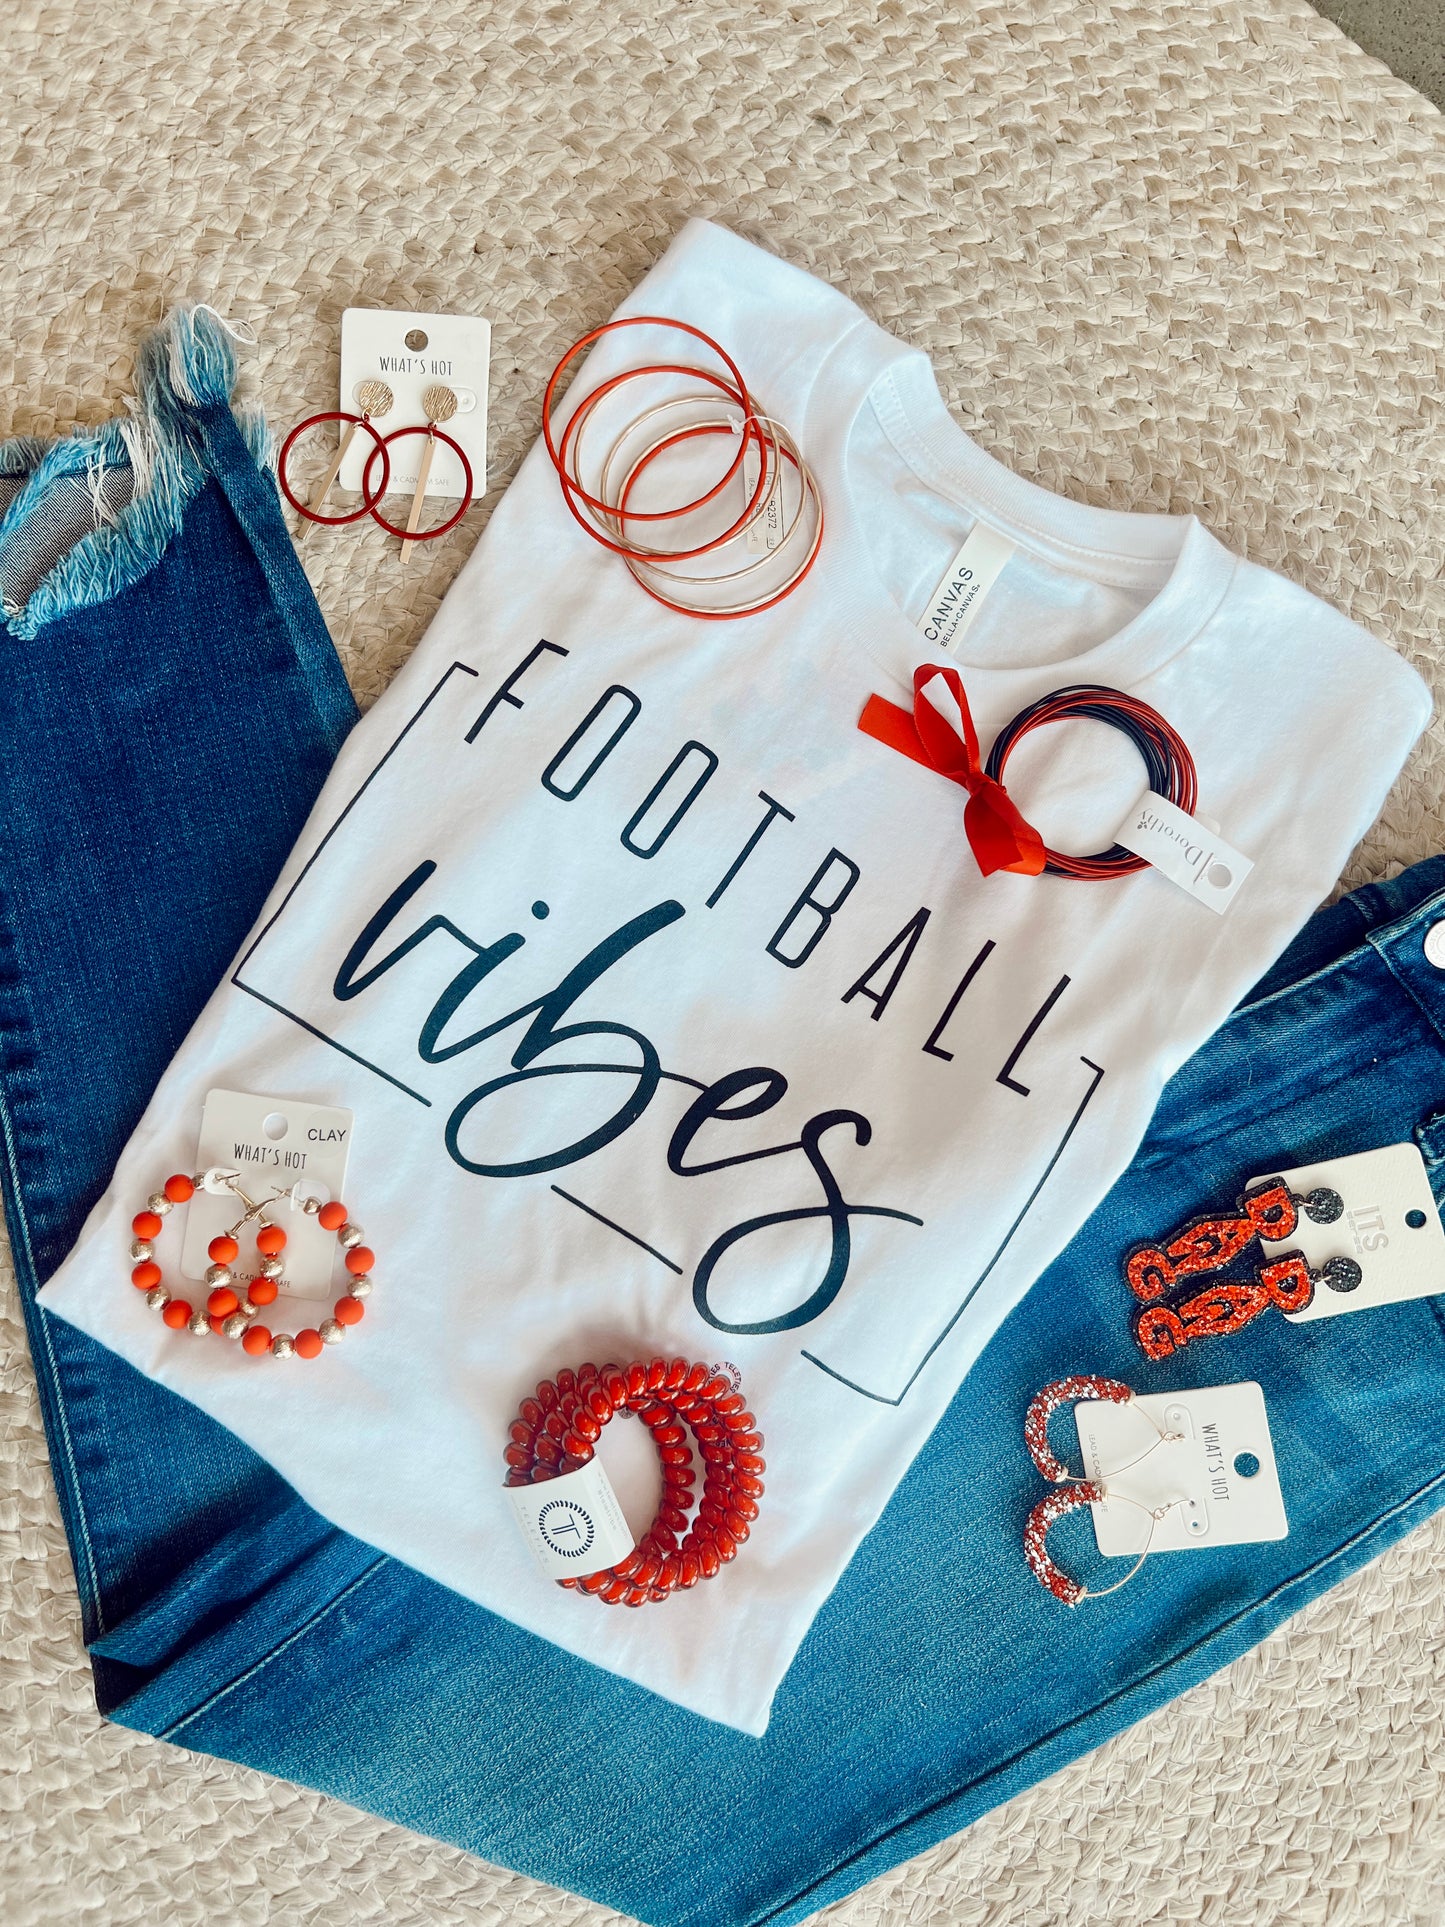 Sale! Football Vibes Graphic Tee (S-L)